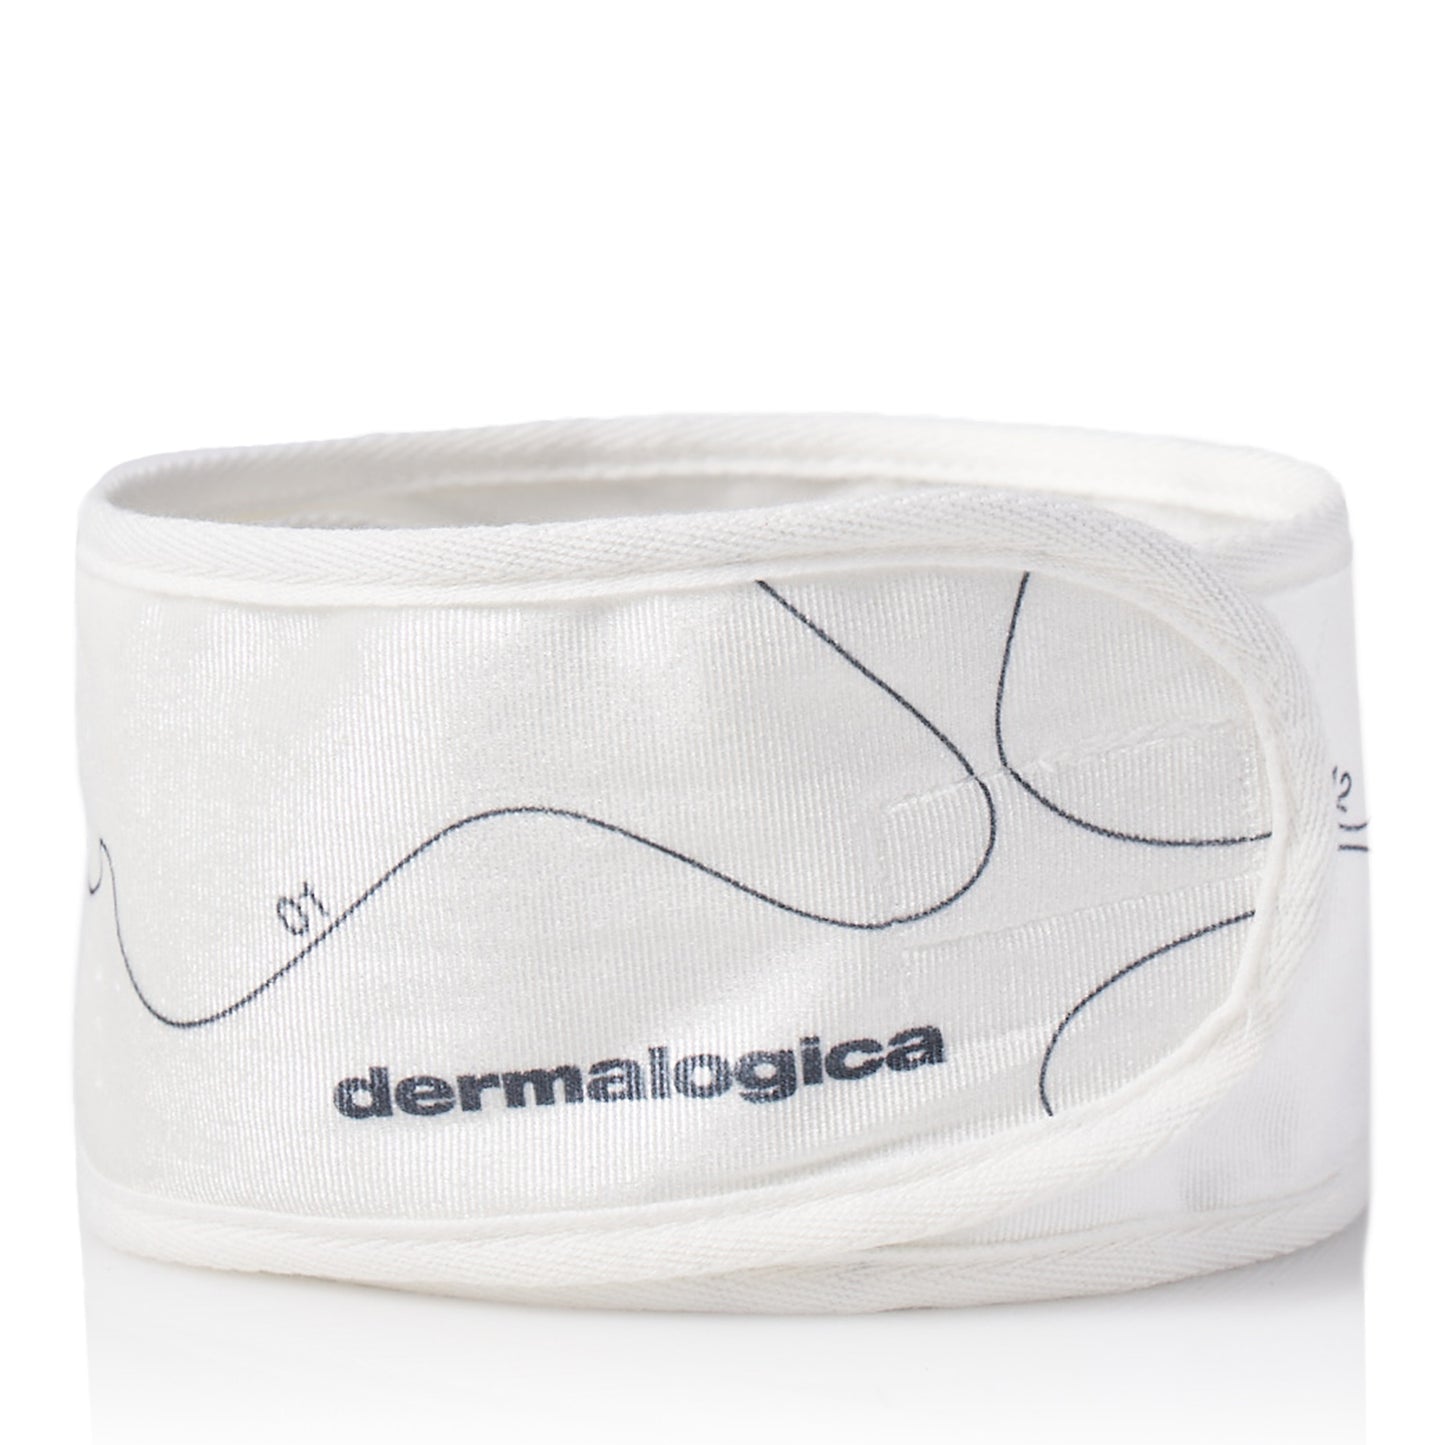 dermalogica face mapping headband - white